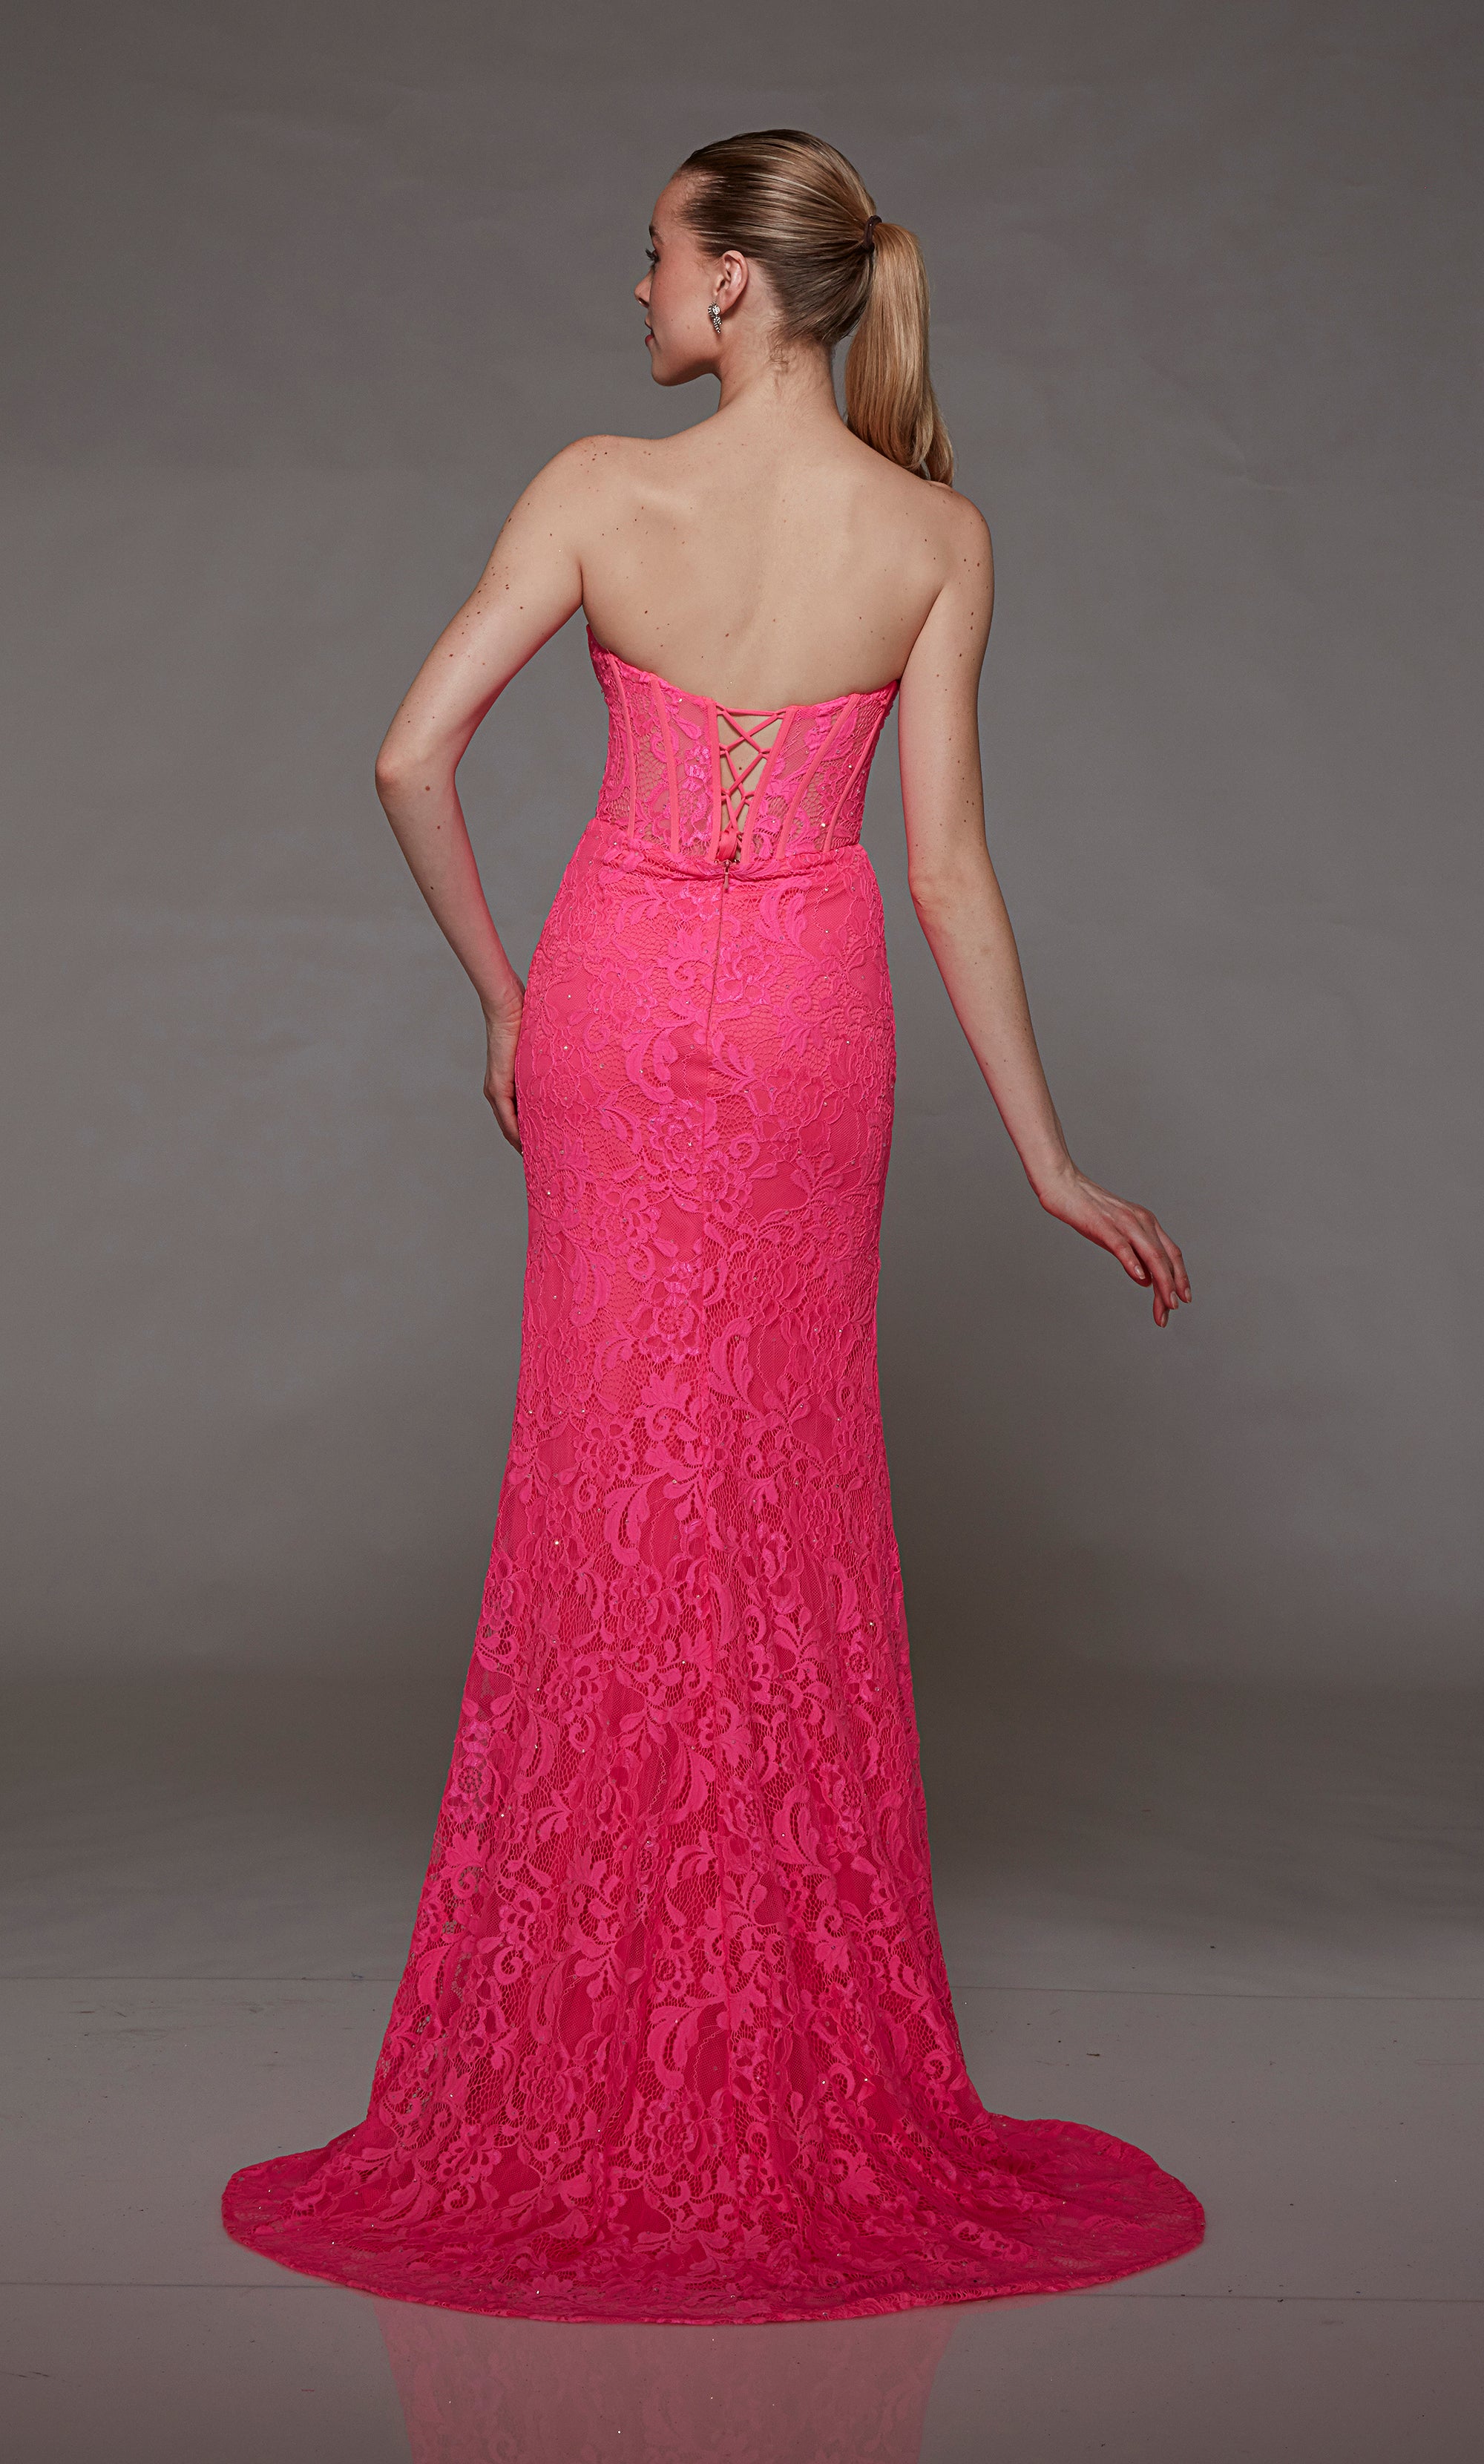 Hot pink lace strapless corset dress: High slit, lace-up back, and an graceful train for an bold and stylish statement.